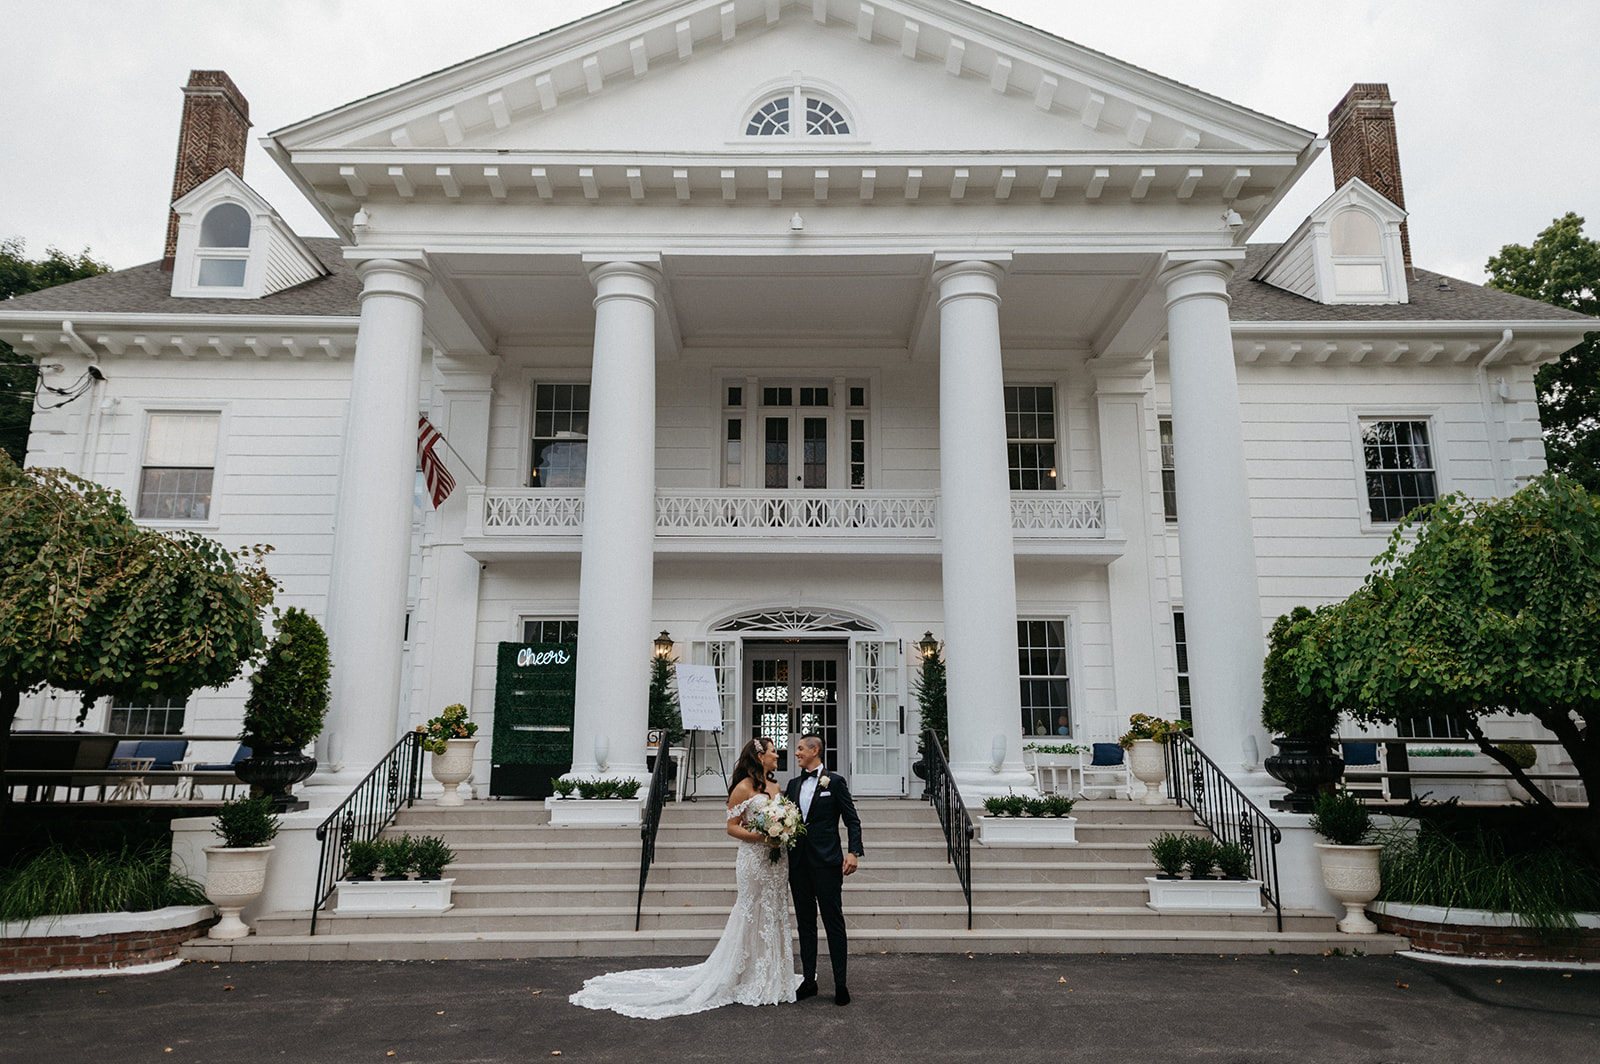 Brides pose together in front of hudson valley wedding venue the briarcliff manor